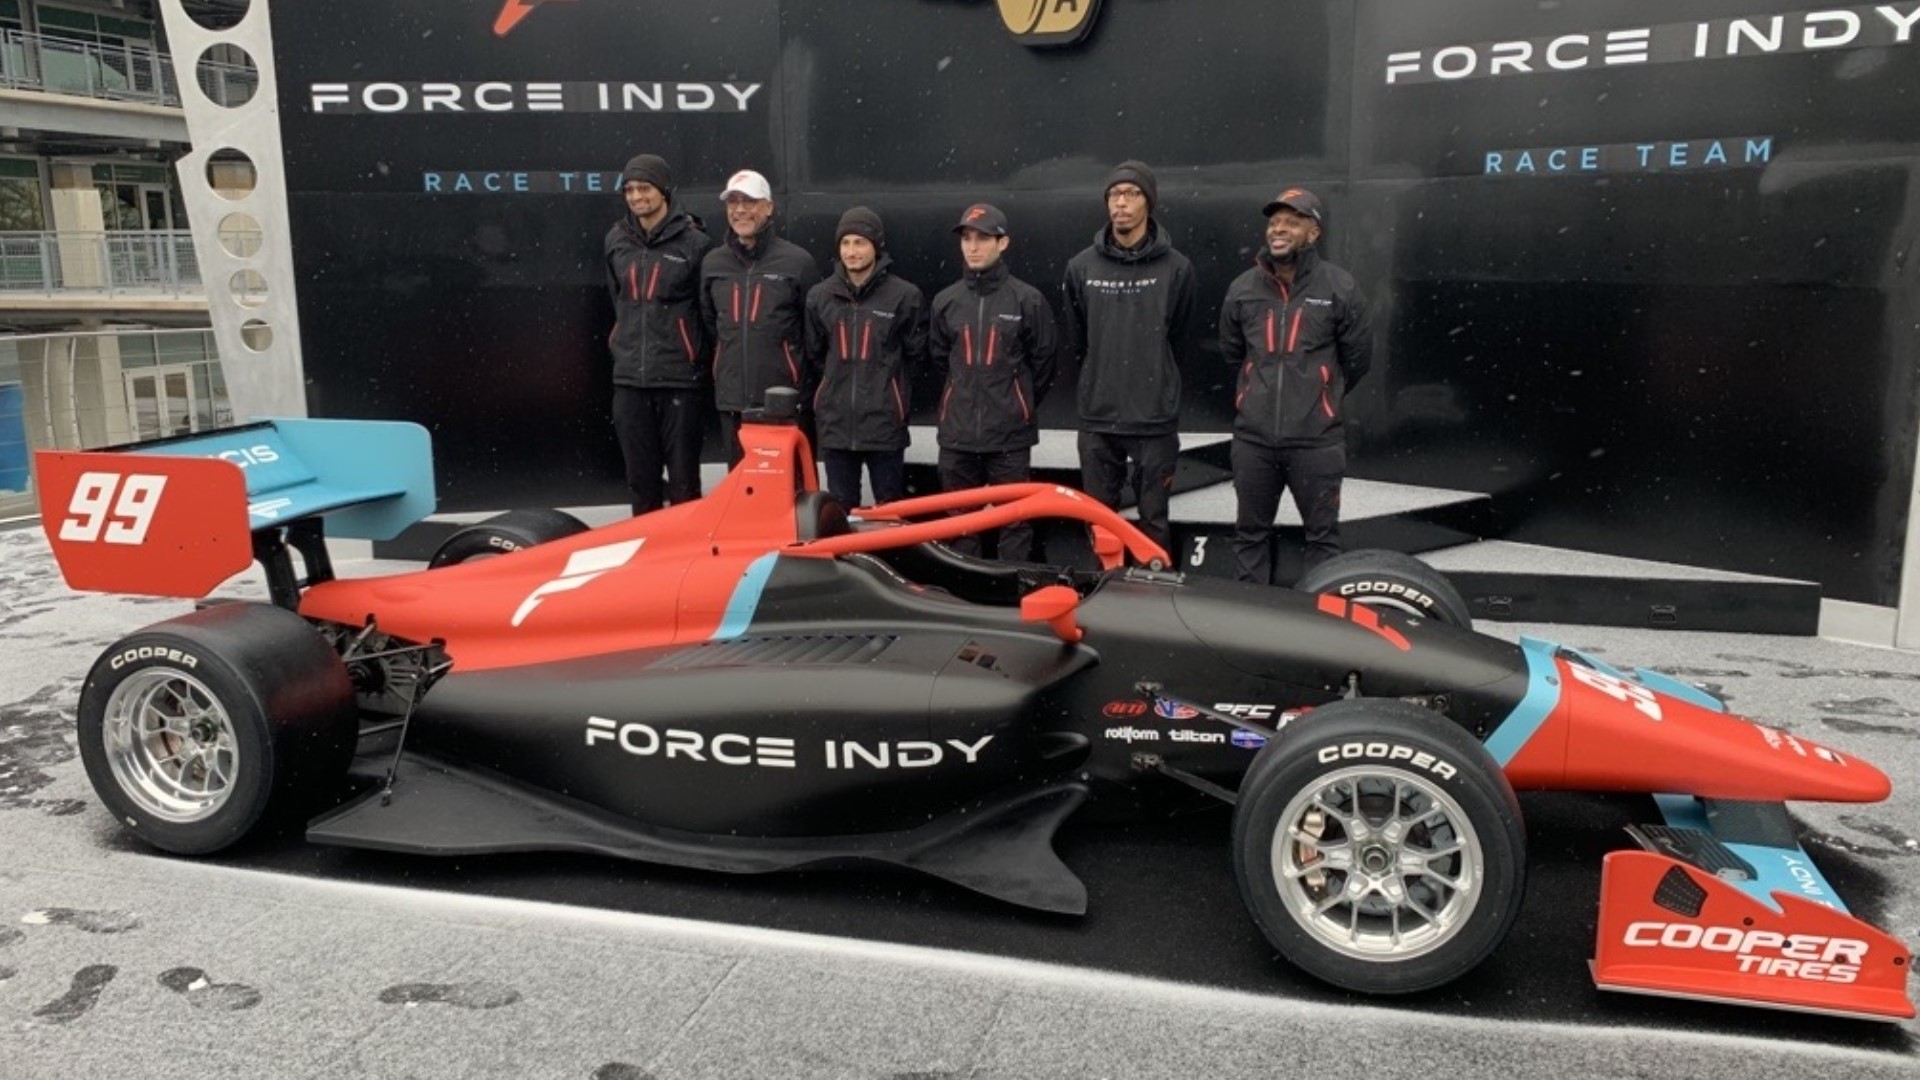 Indy Lights 2022 Schedule Ernie Francis Jr. To Drive For Force Indy In 2022 Indy Lights | Wthr.com